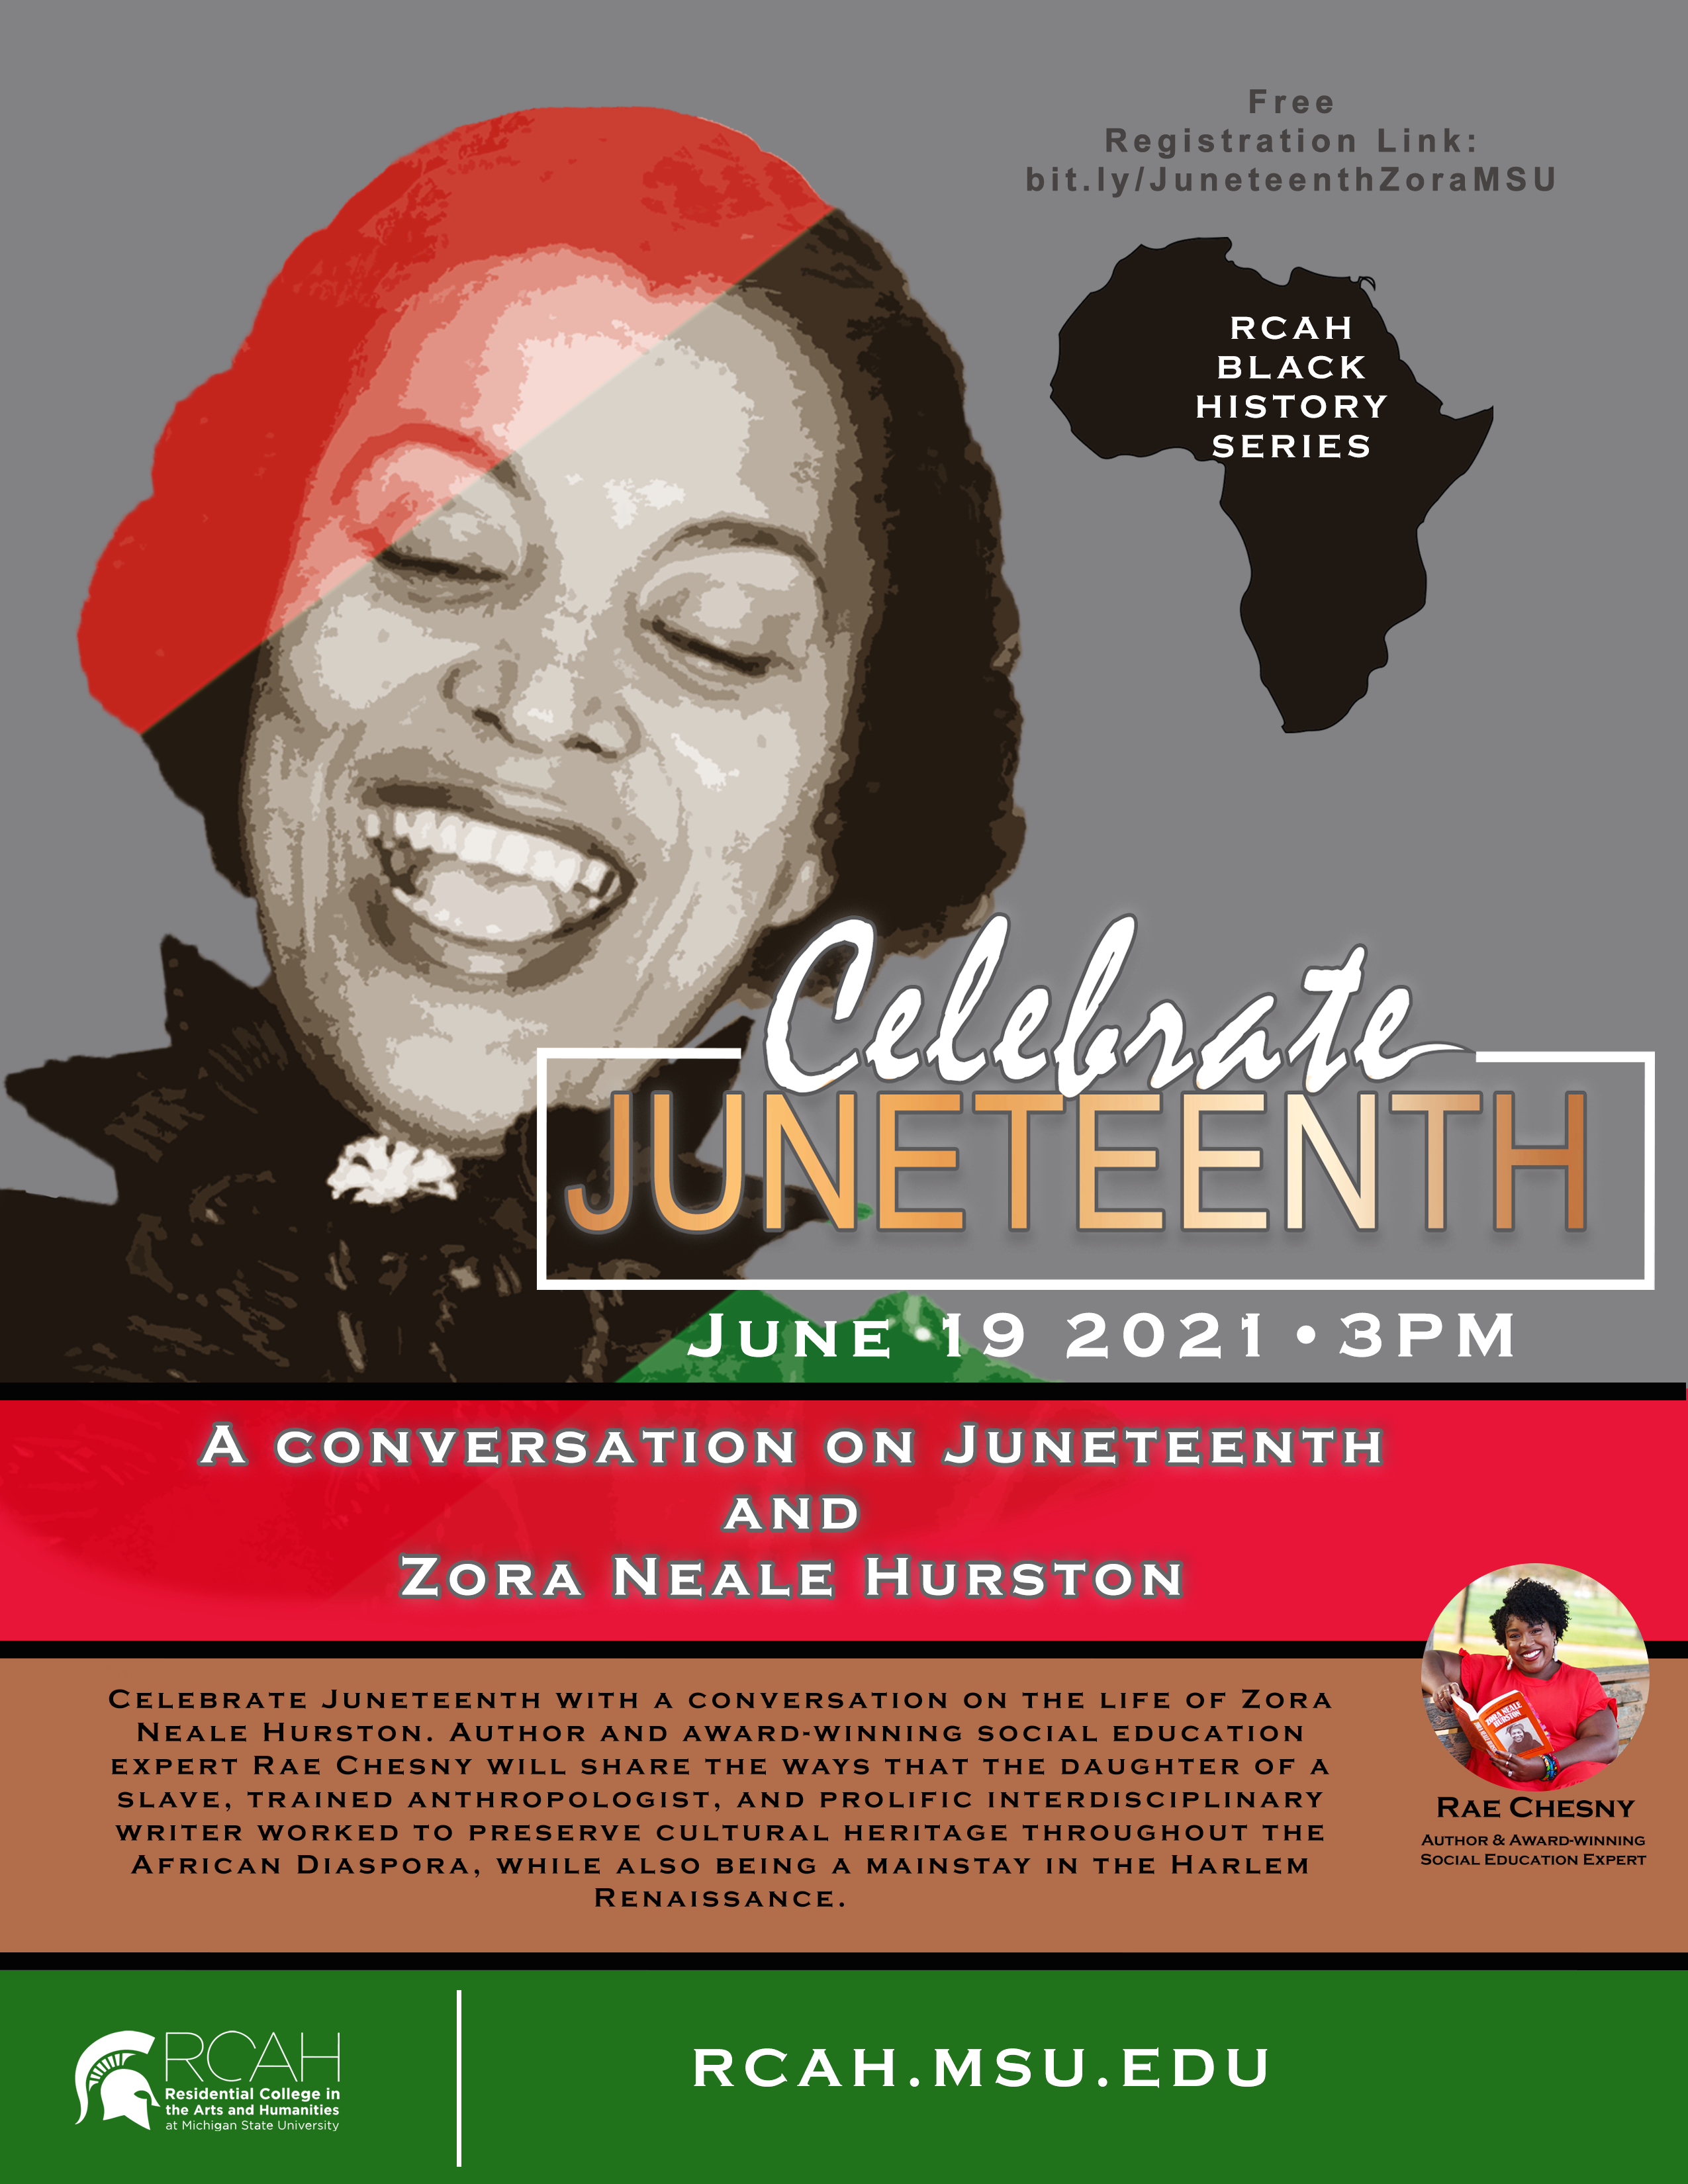 Image is the flyer for the Juneteenth event featuring an illustration of Zora Neale Hurston and colorful red and green boxes.